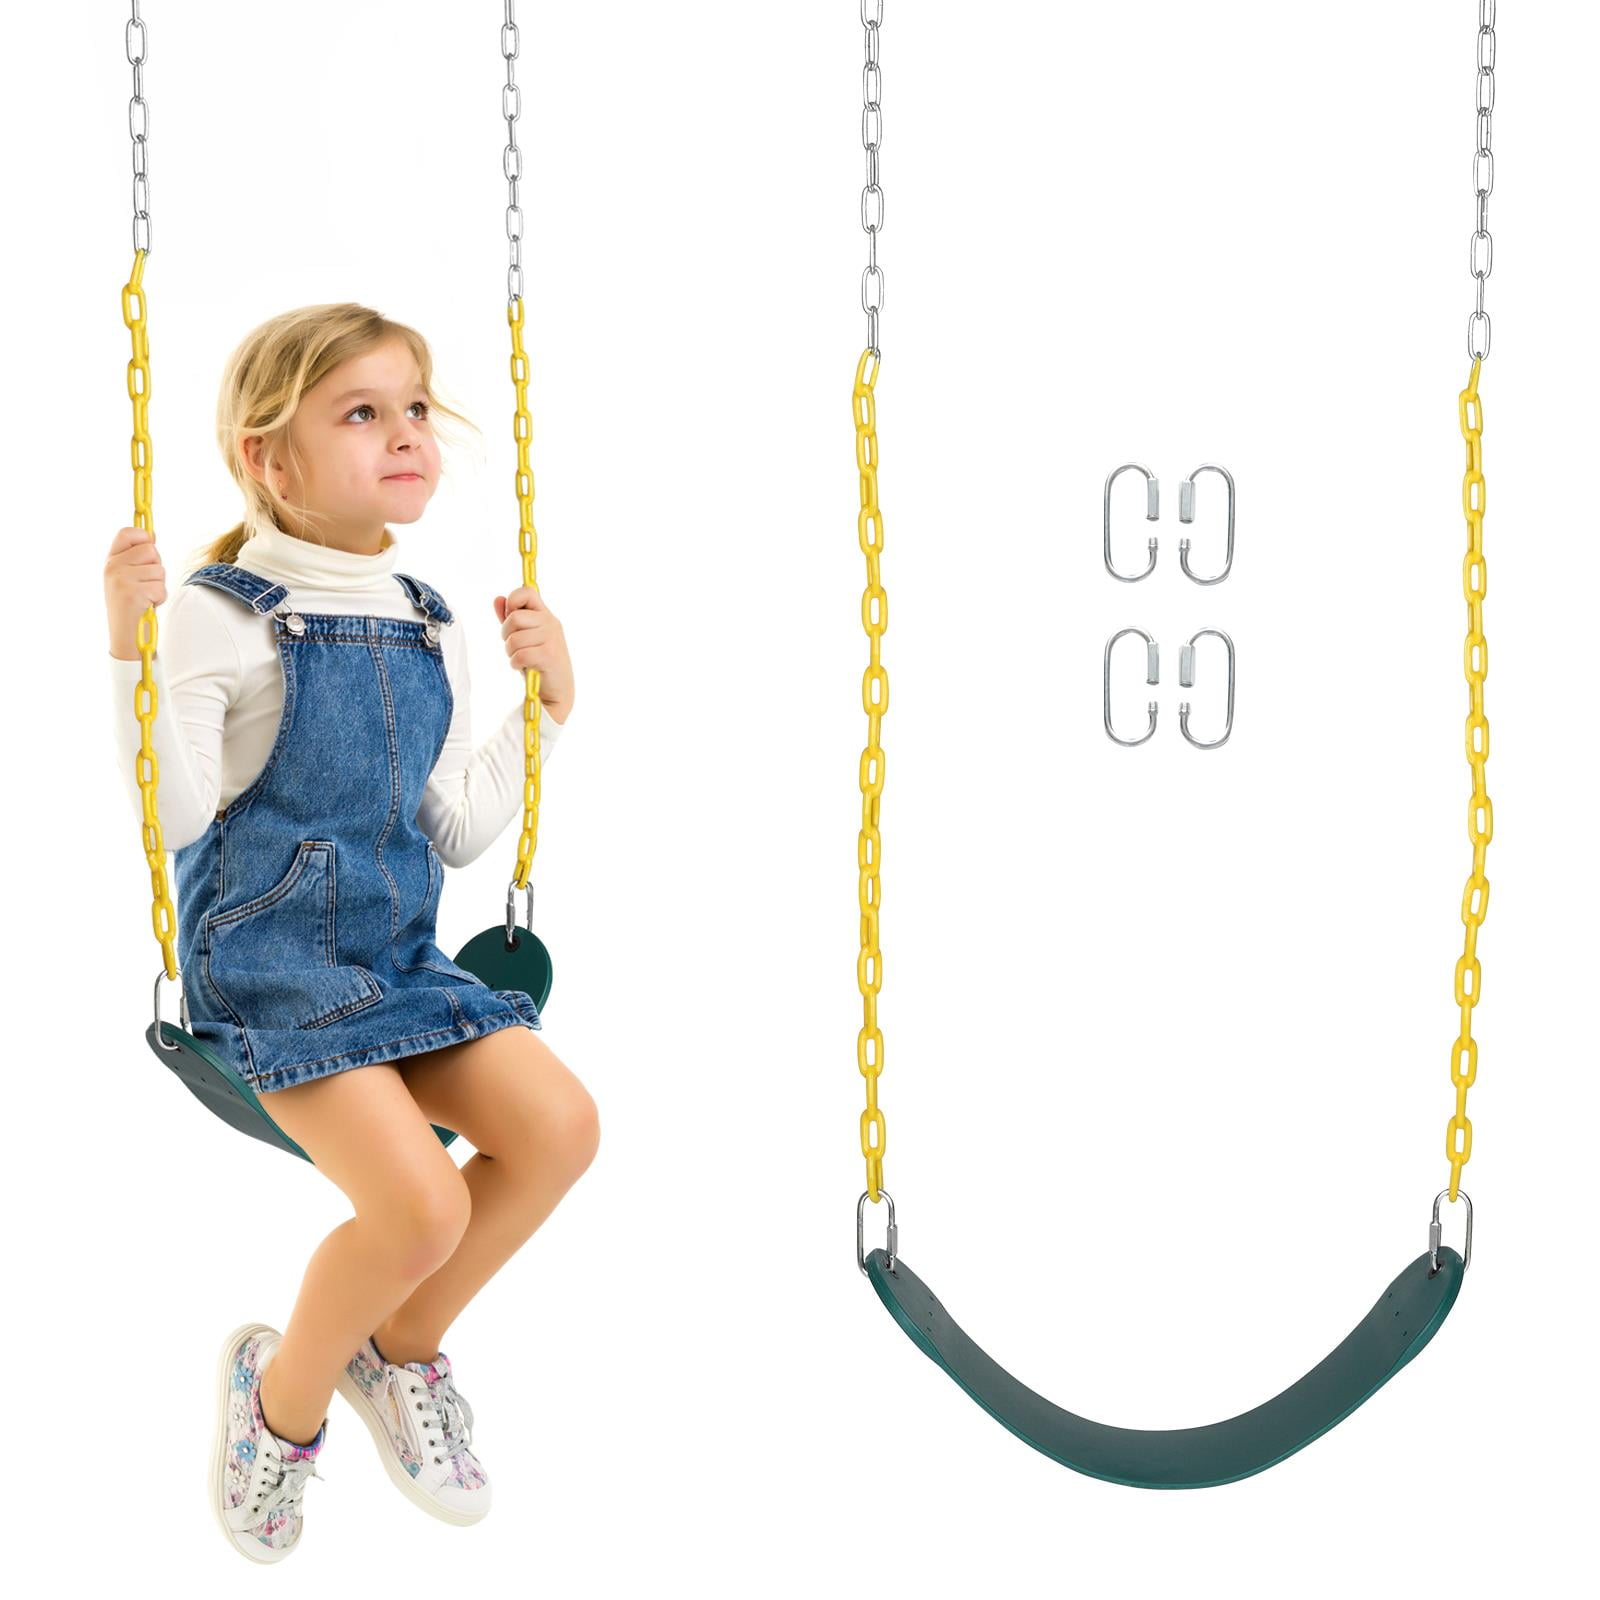 Heavy Duty Swing Seat Swings Set Accessories with Coated Chain Kids Adult US 